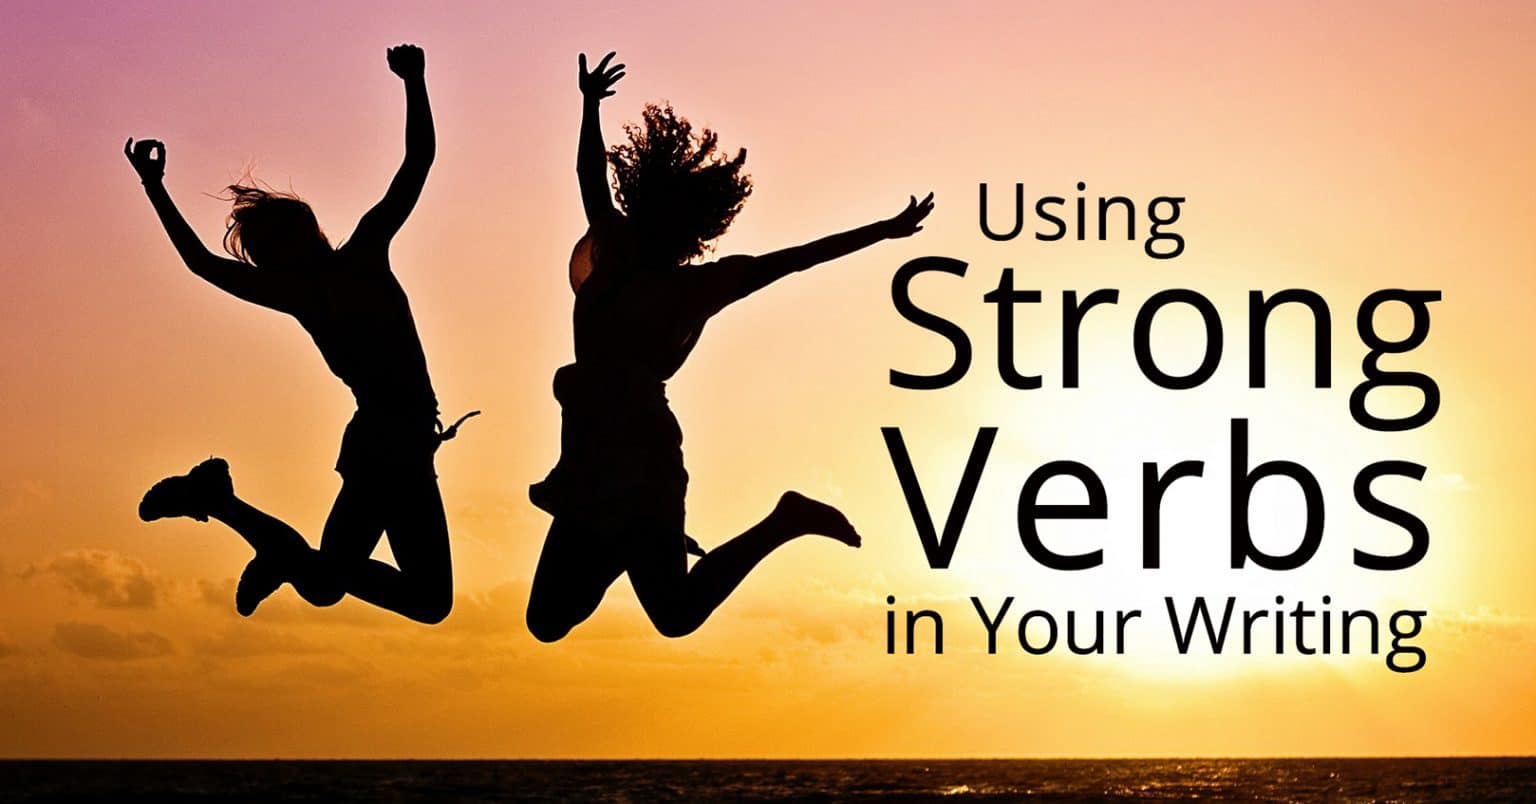 using-strong-verbs-in-your-writing-book-cave